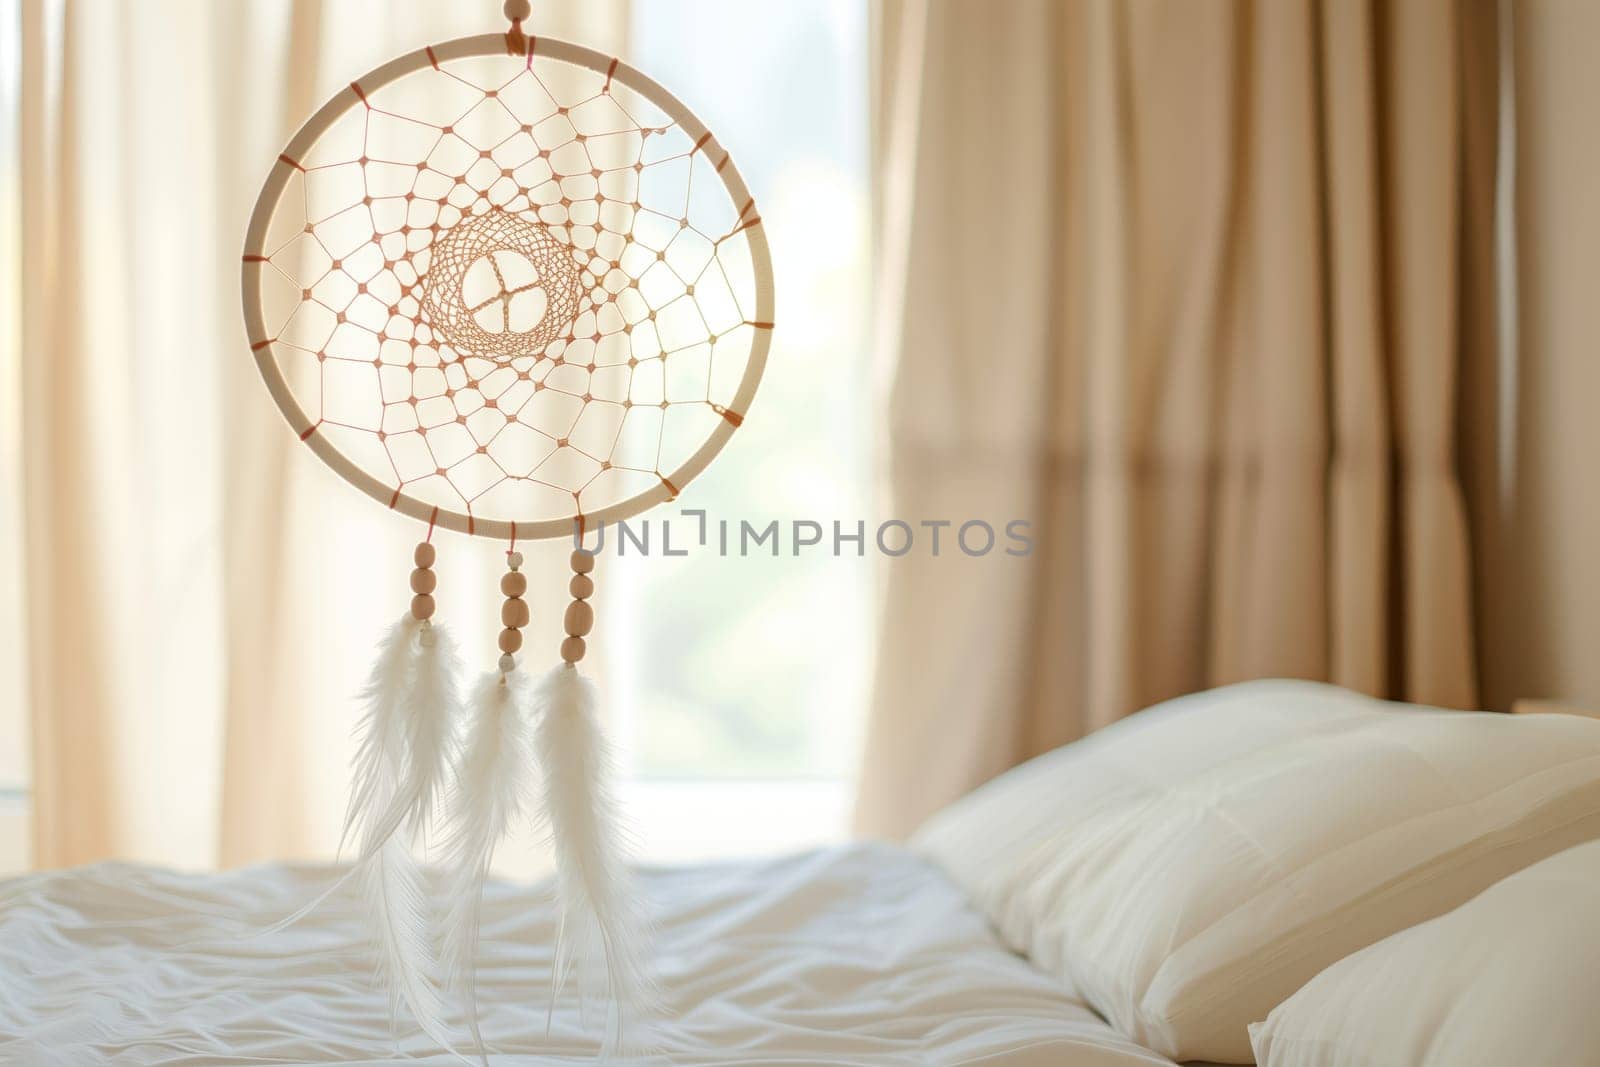 Wooden twig dream catcher hangs above bed in cozy interior design setting by richwolf